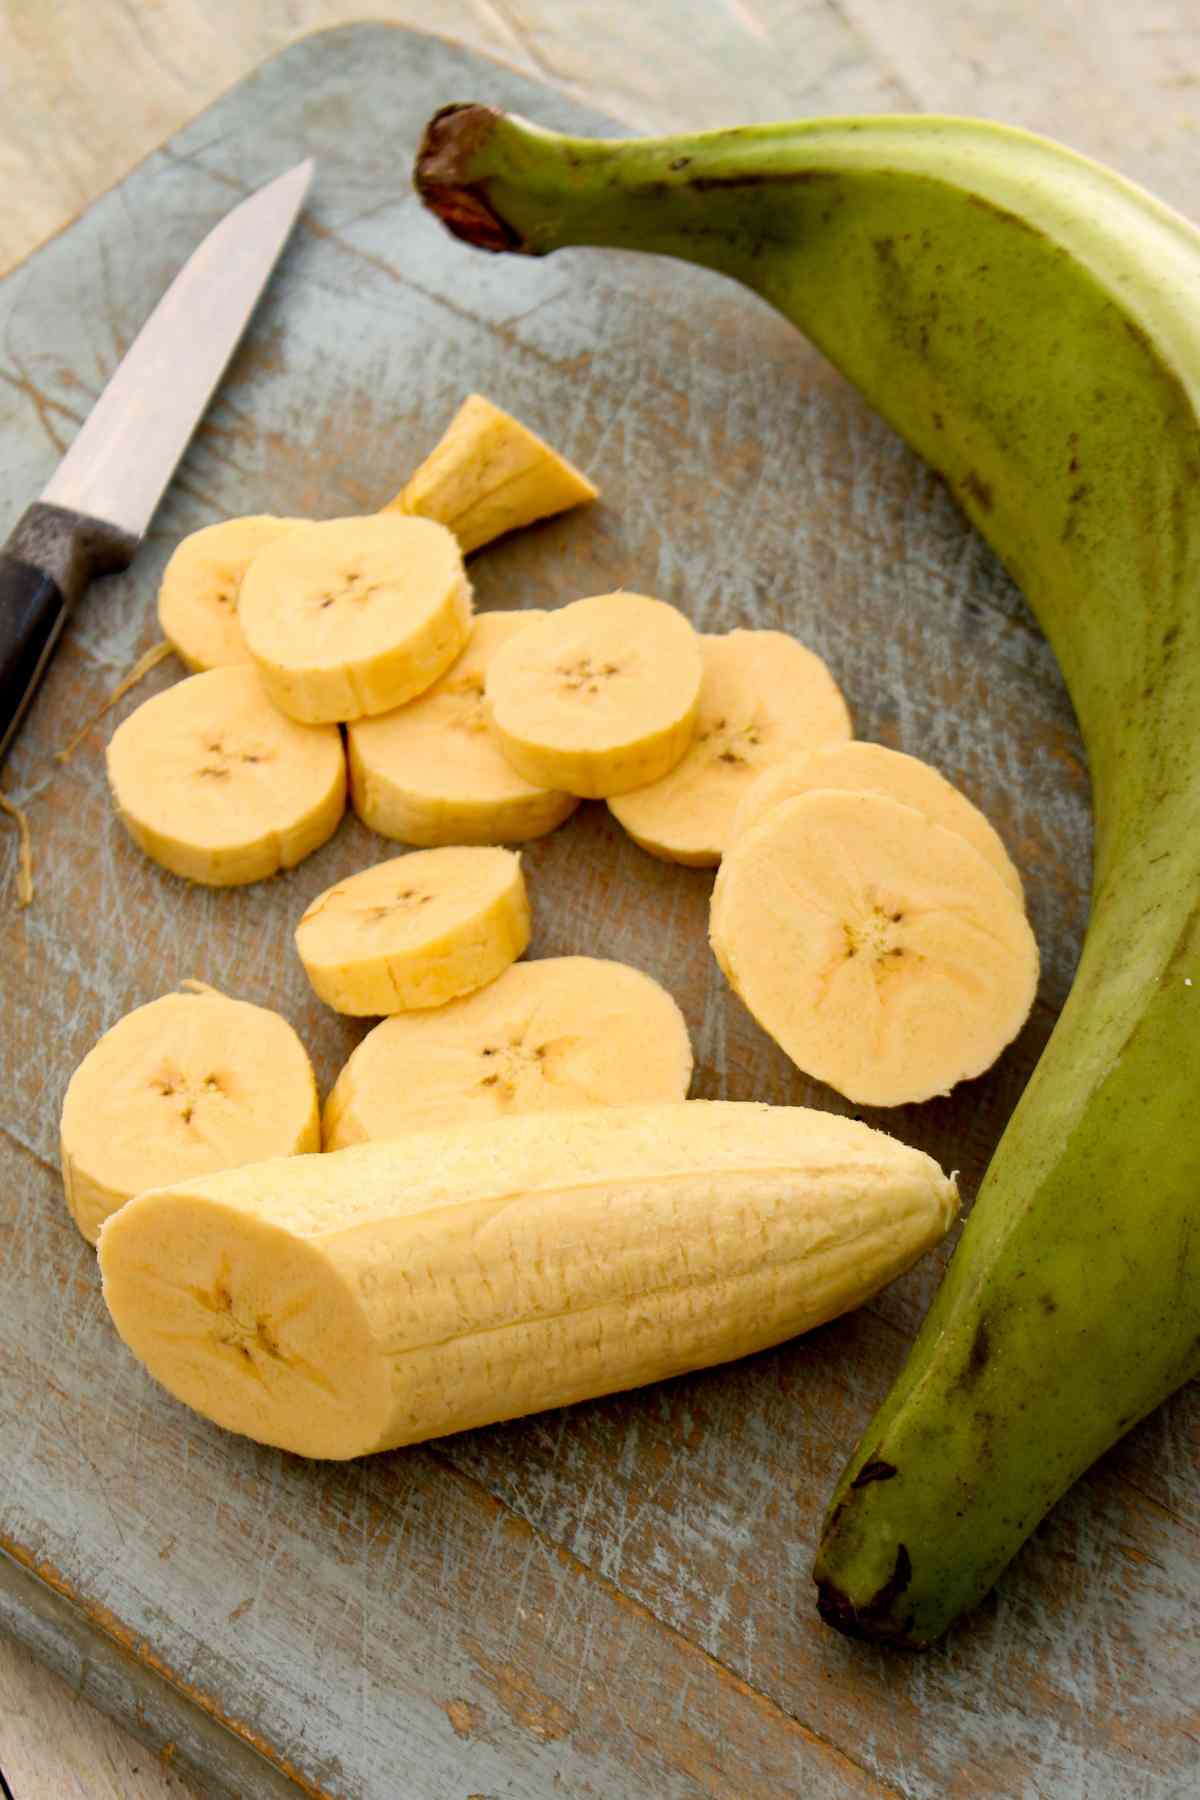 If you're on a ketogenic diet, you may be wondering if plantains are a good food option. In this post, we'll explore whether plantains are keto-friendly and also how many carbs are in plantains.